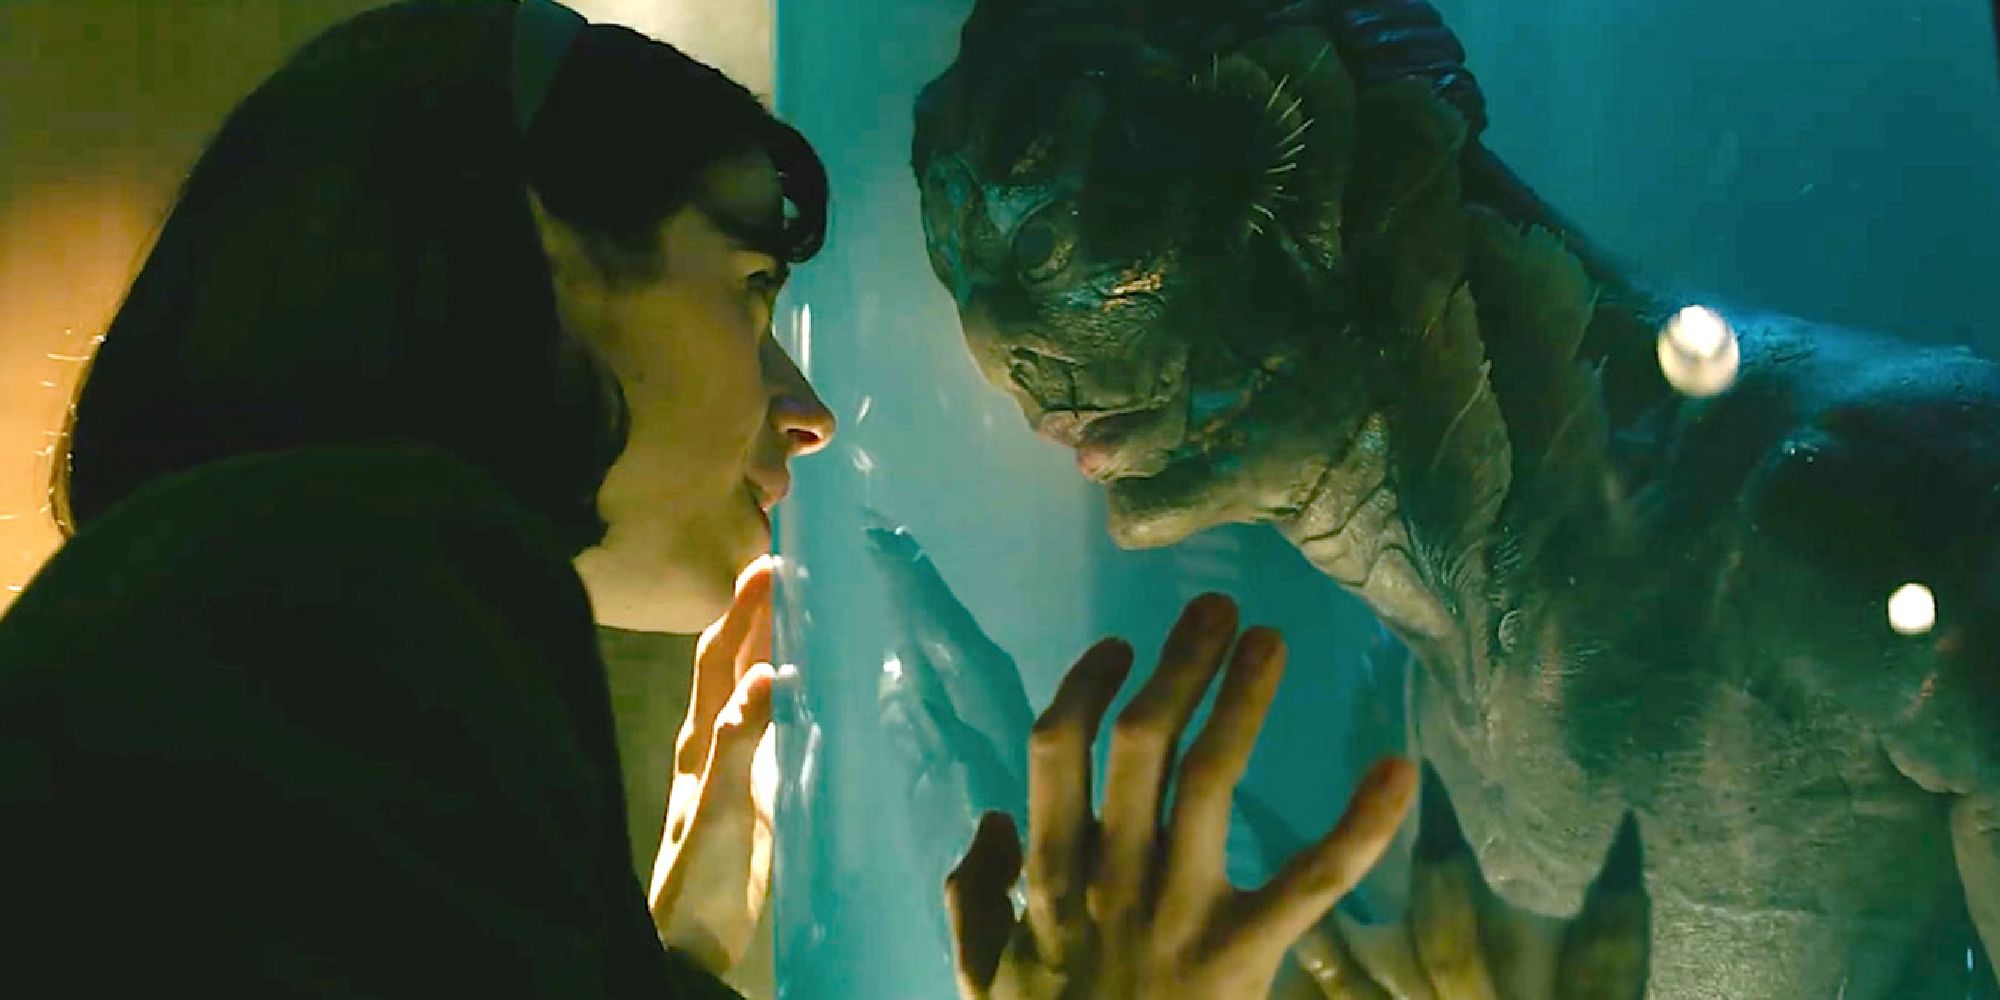 Sally Hawkins staring at the fish man through glass in The Shape of Water